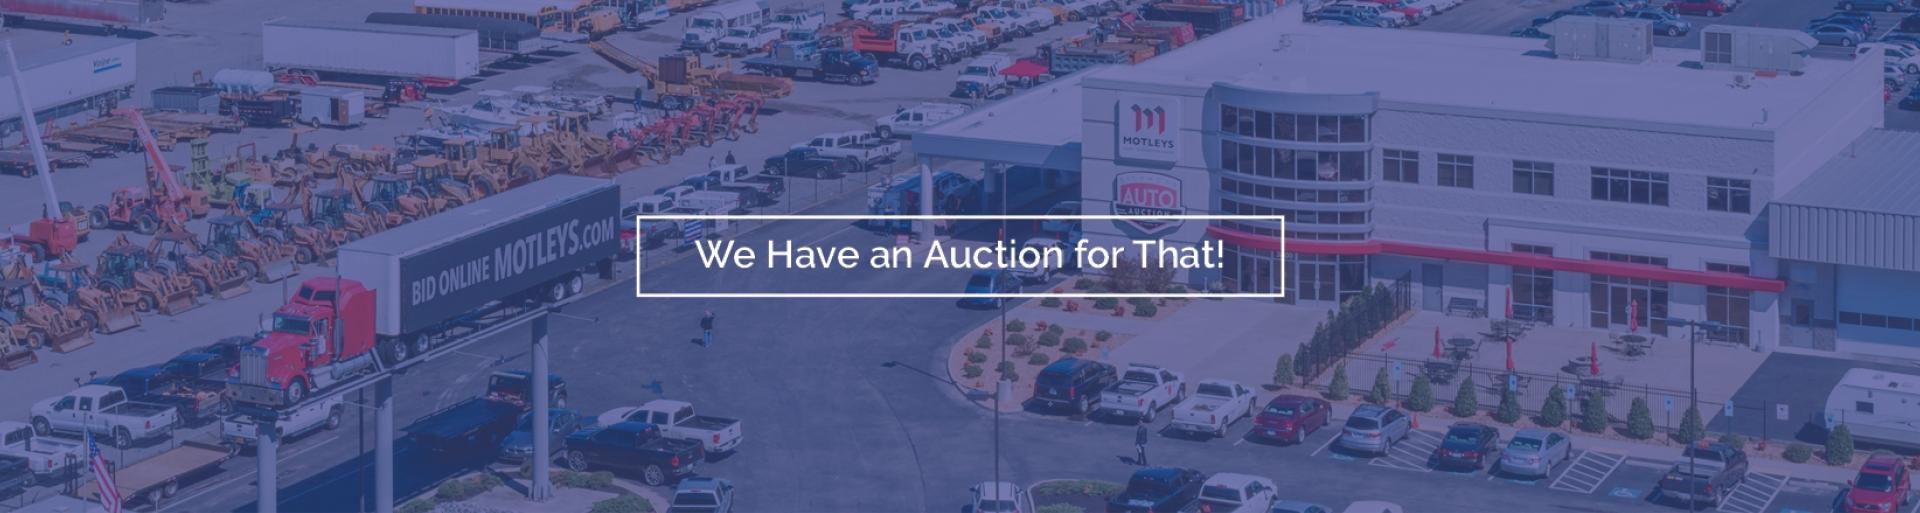 We have an auction slider